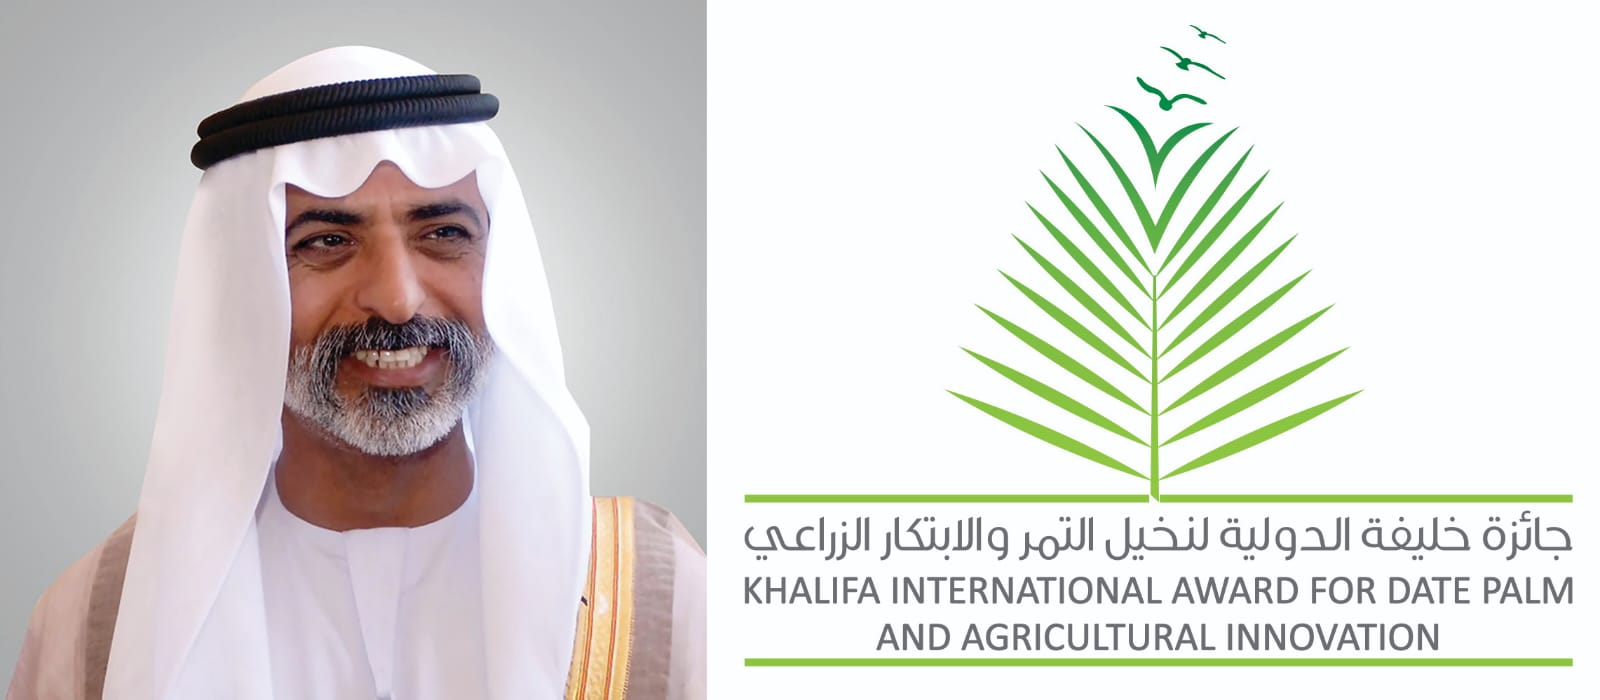 Khalifa International Award for Date Palm and Agricultural Innovation, publishes two new scientific books